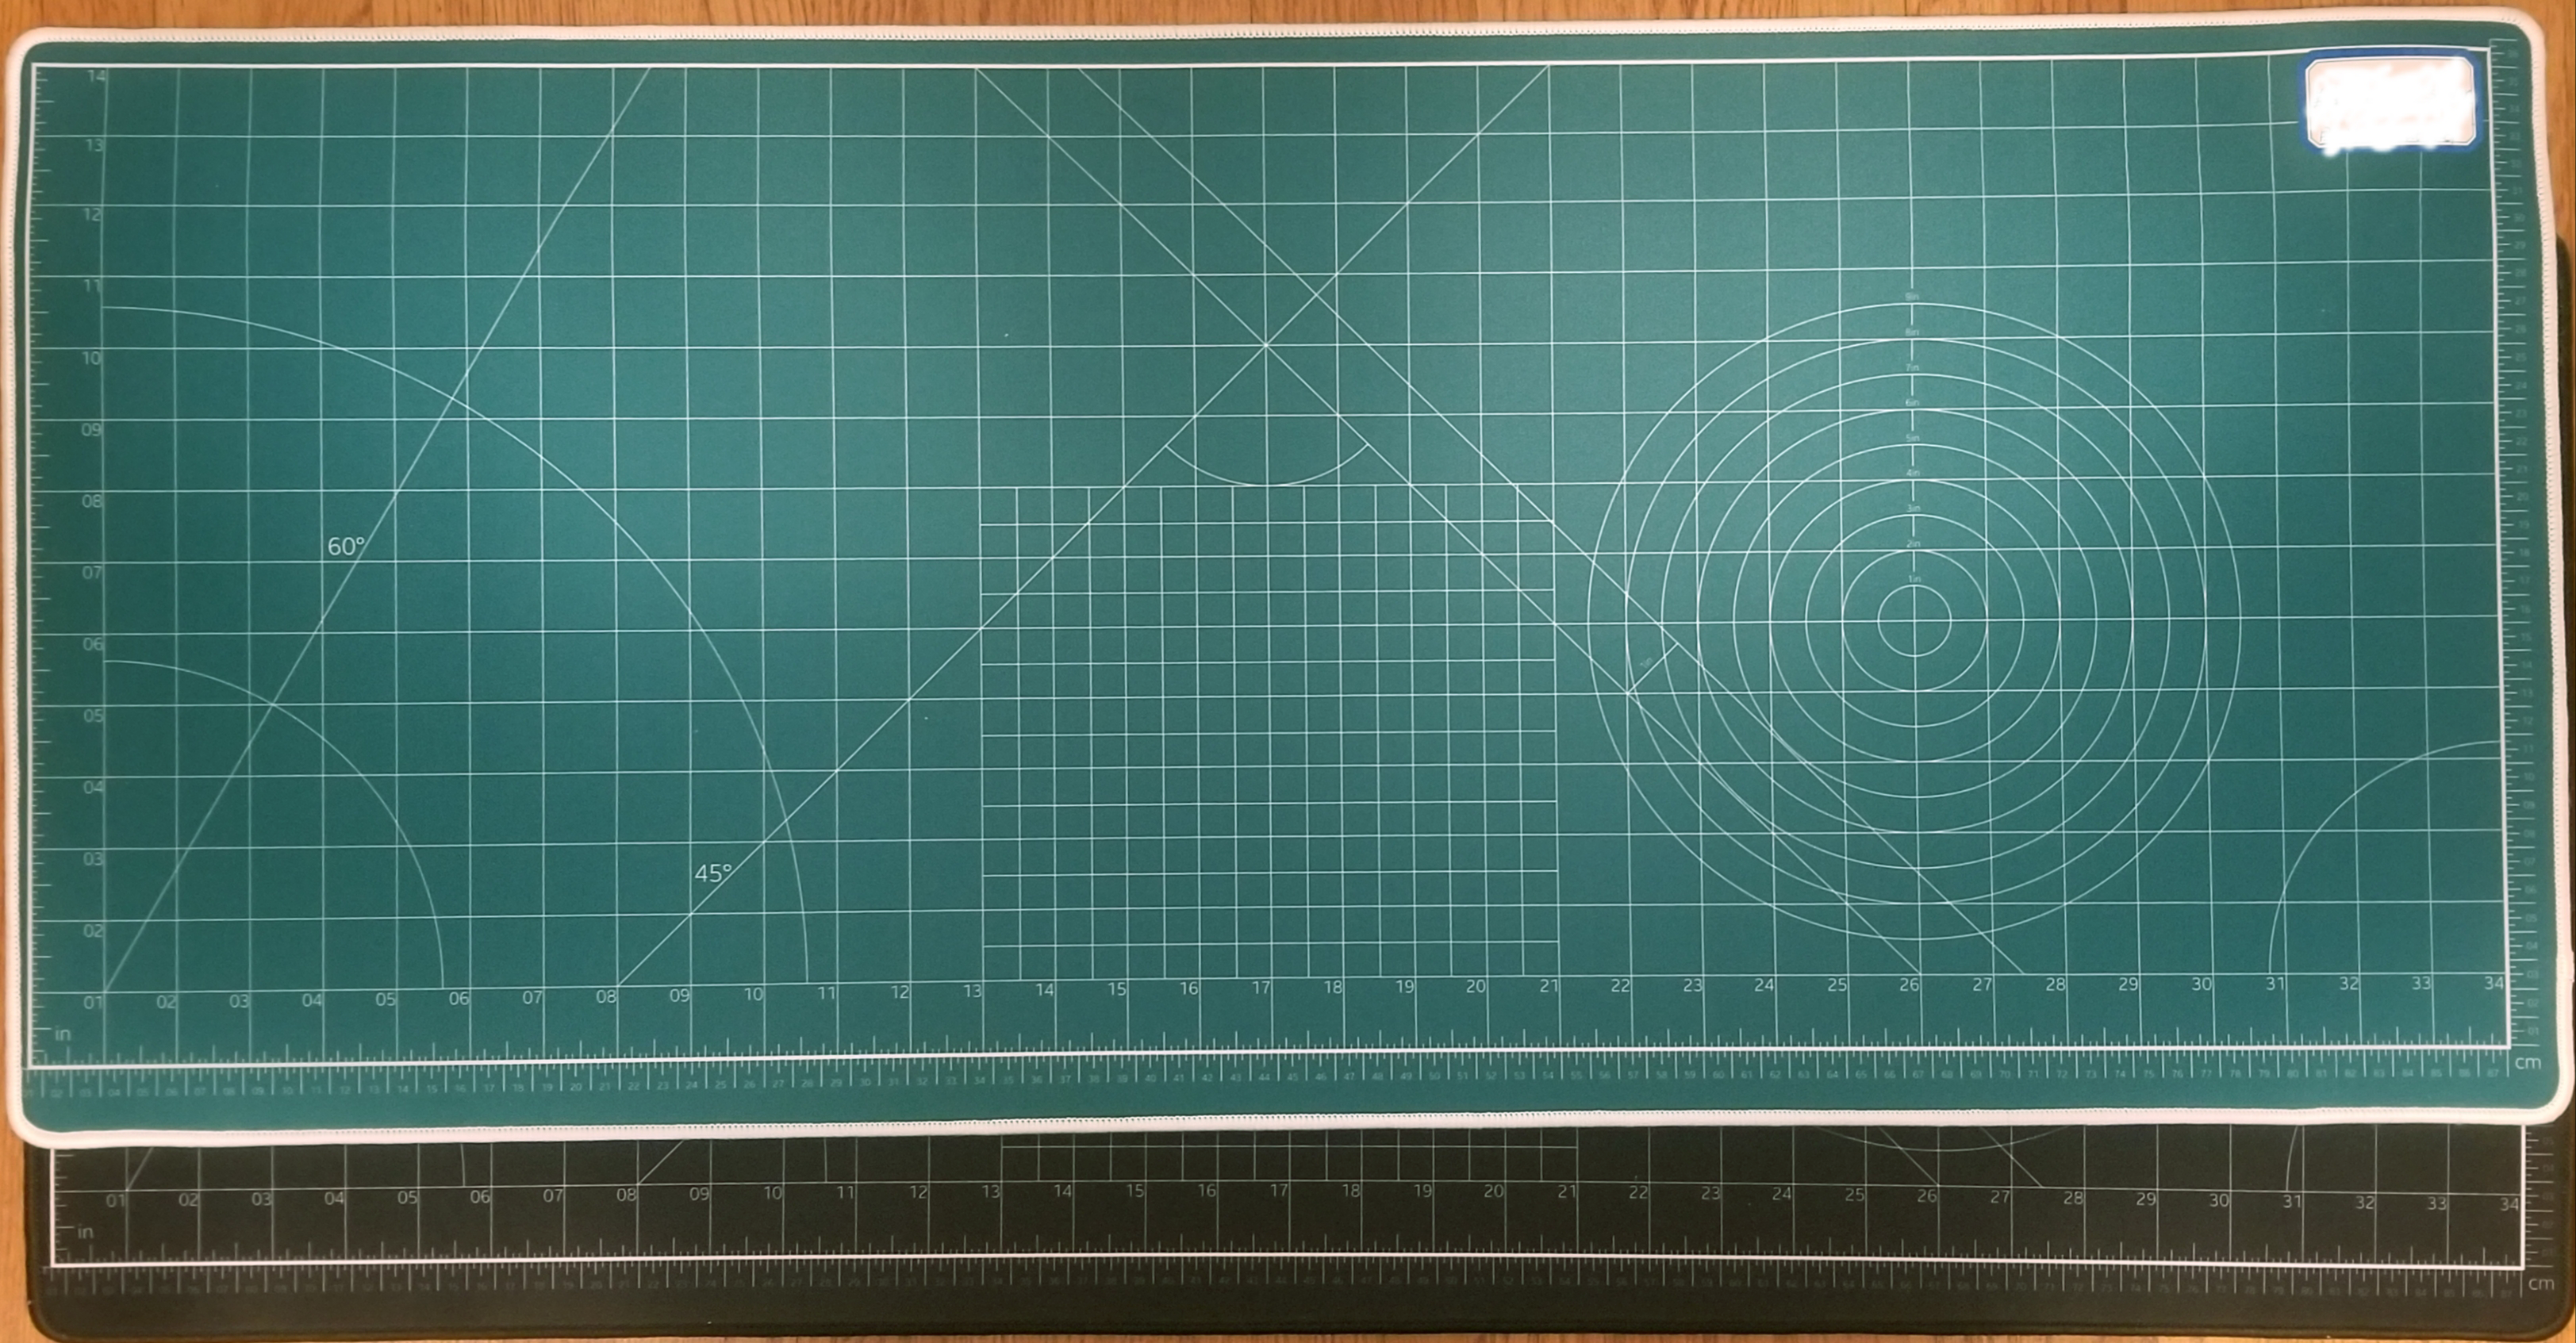 IC] Hobby mat themed desk pad (with accurate measurements) : r